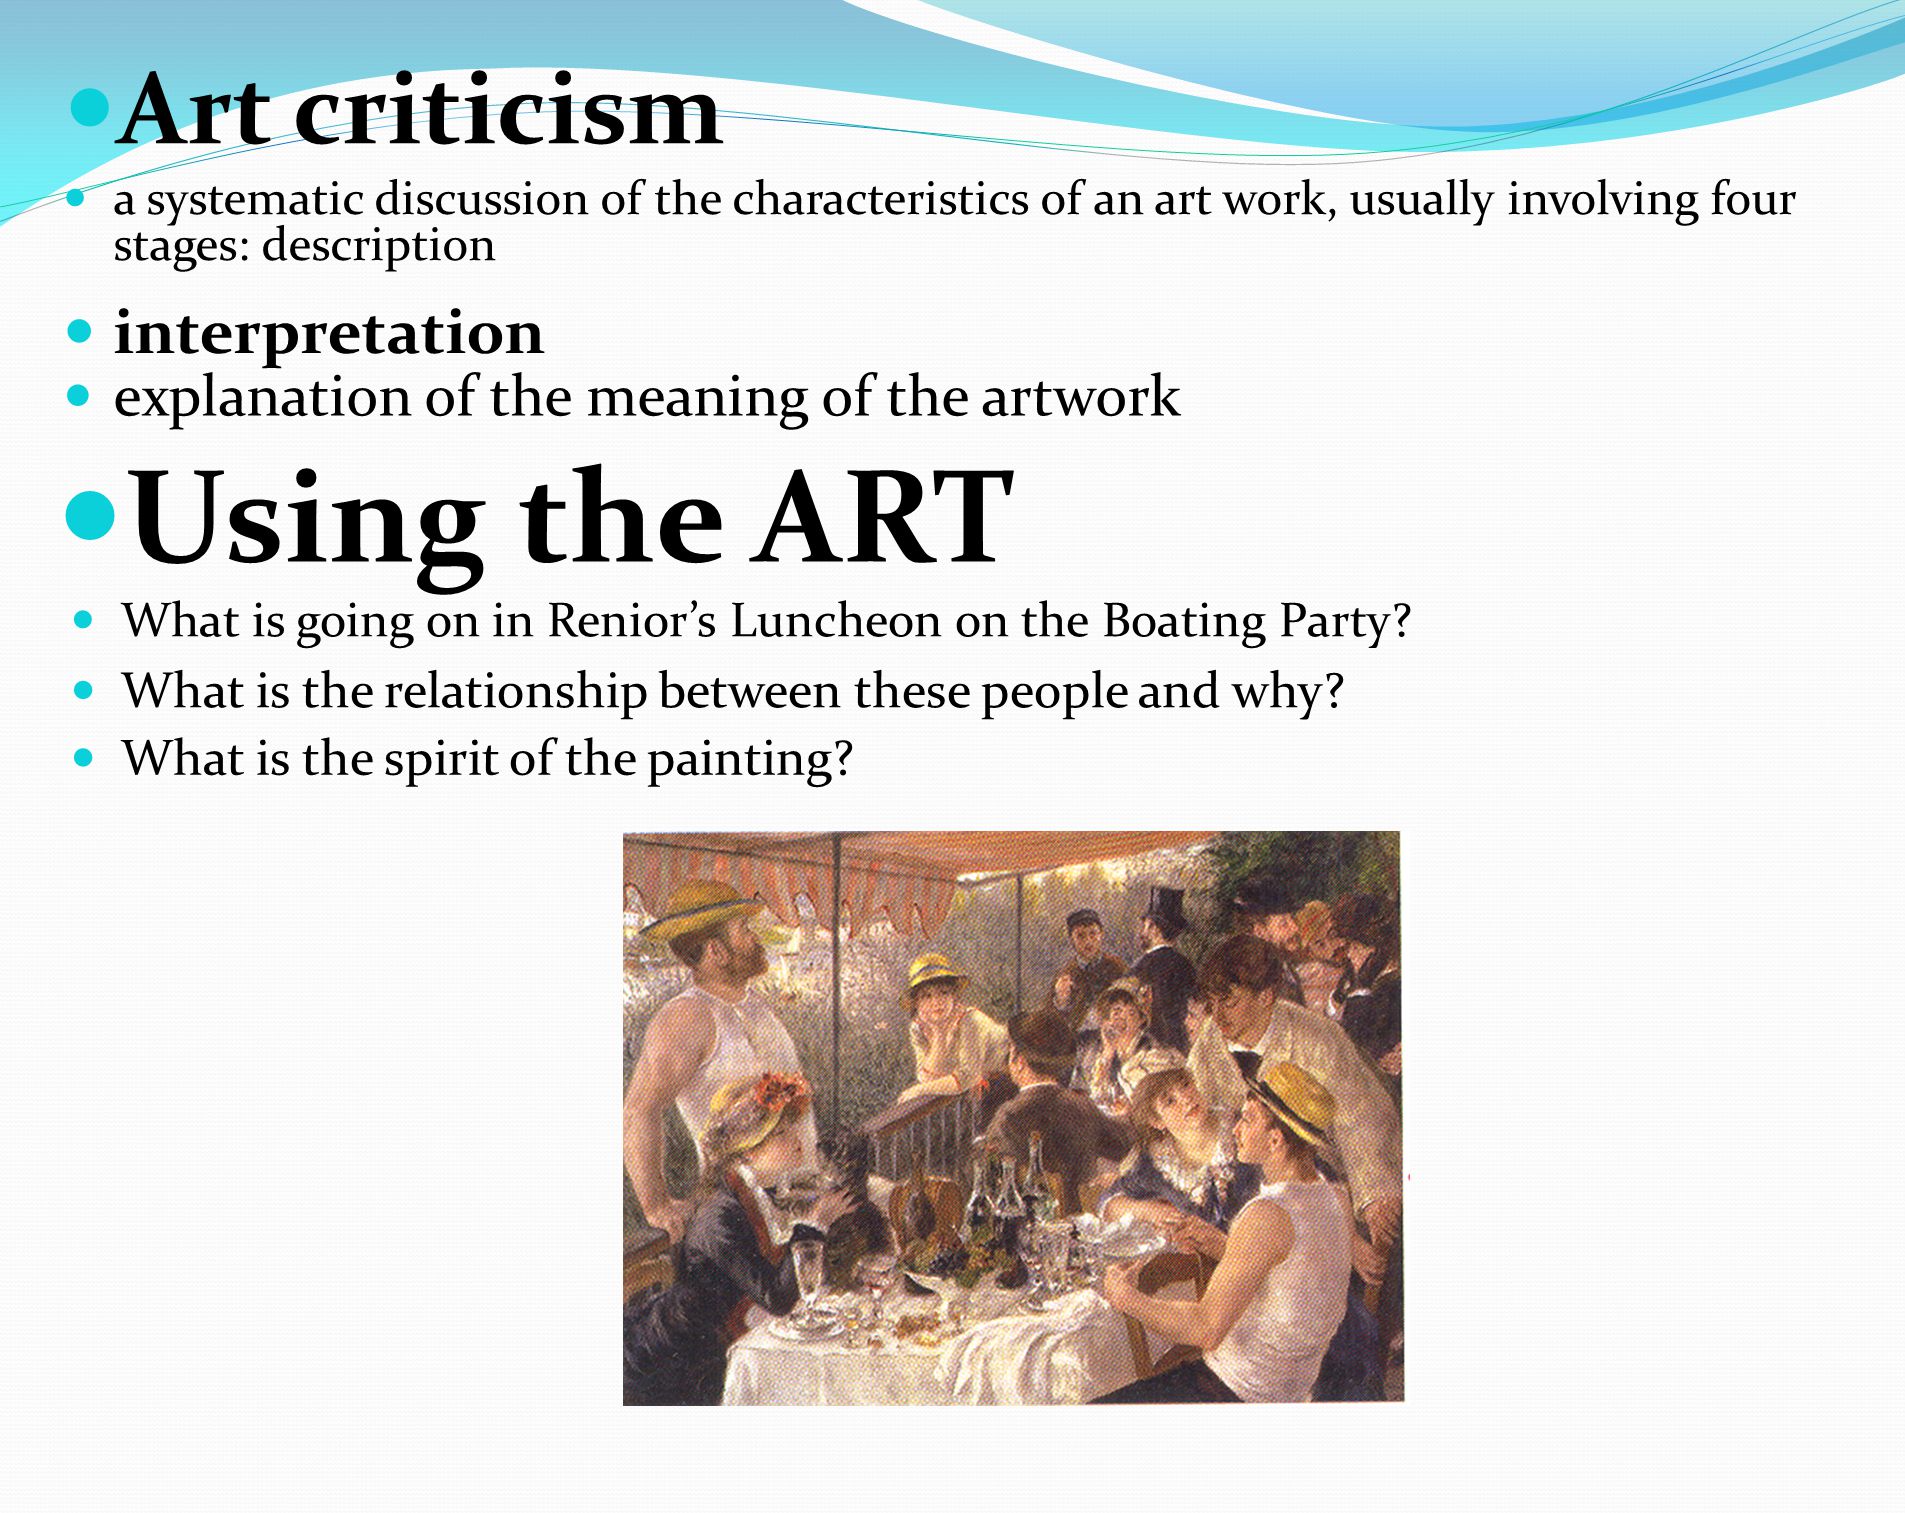 Art criticism a systematic discussion of the characteristics of an art work, usually involving four stages: description interpretation explanation of the meaning of the artwork Using the ART What is going on in Renior’s Luncheon on the Boating Party.